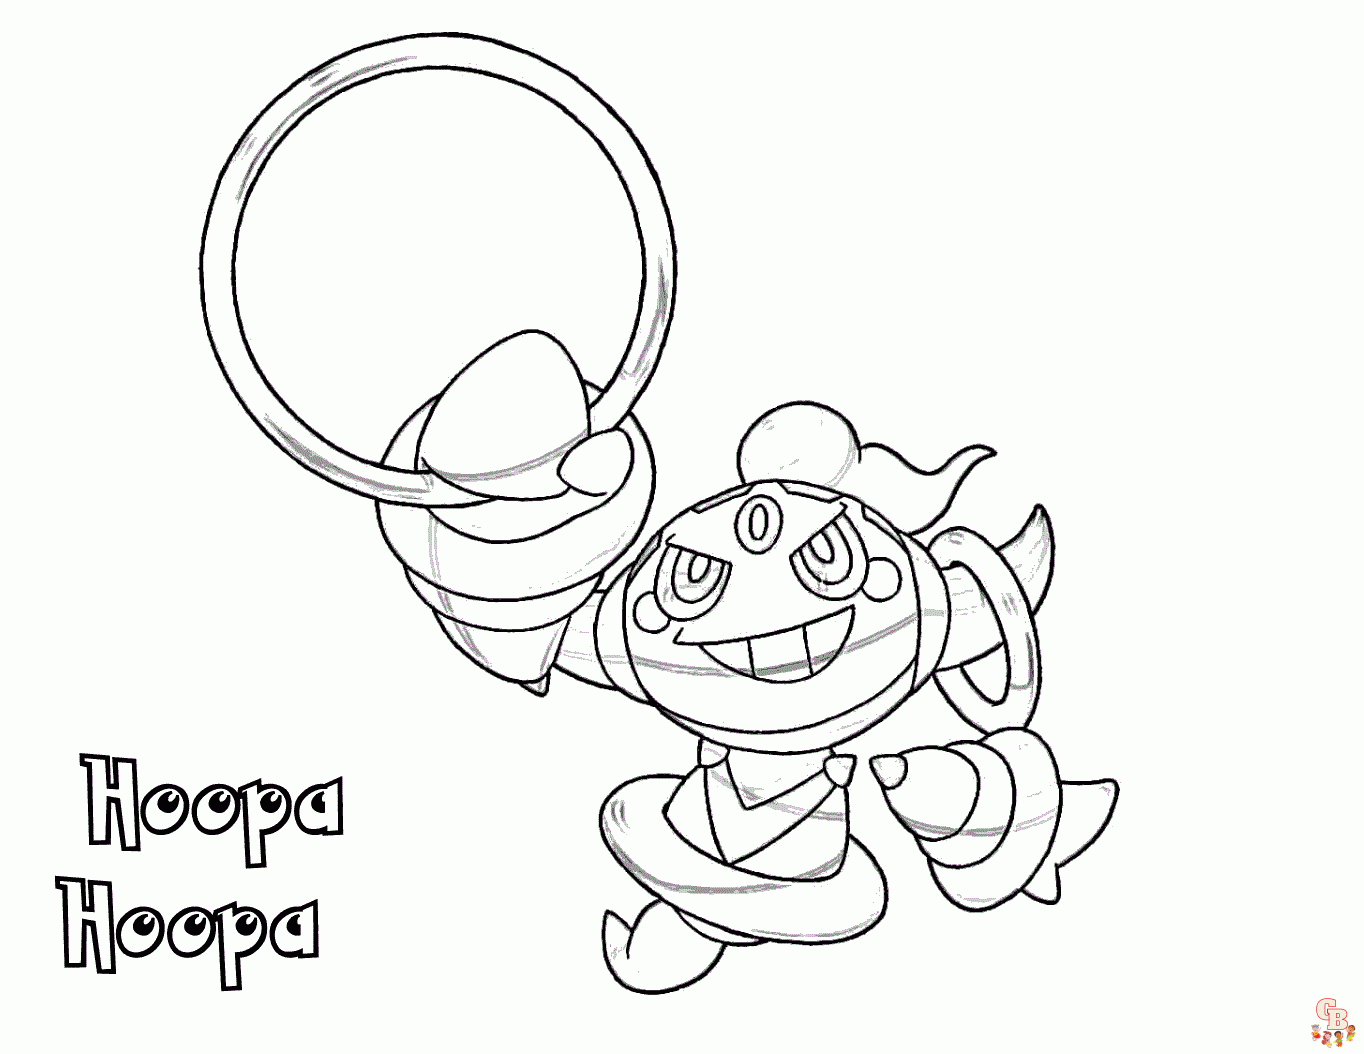 Pokemon Hoopa coloring pages